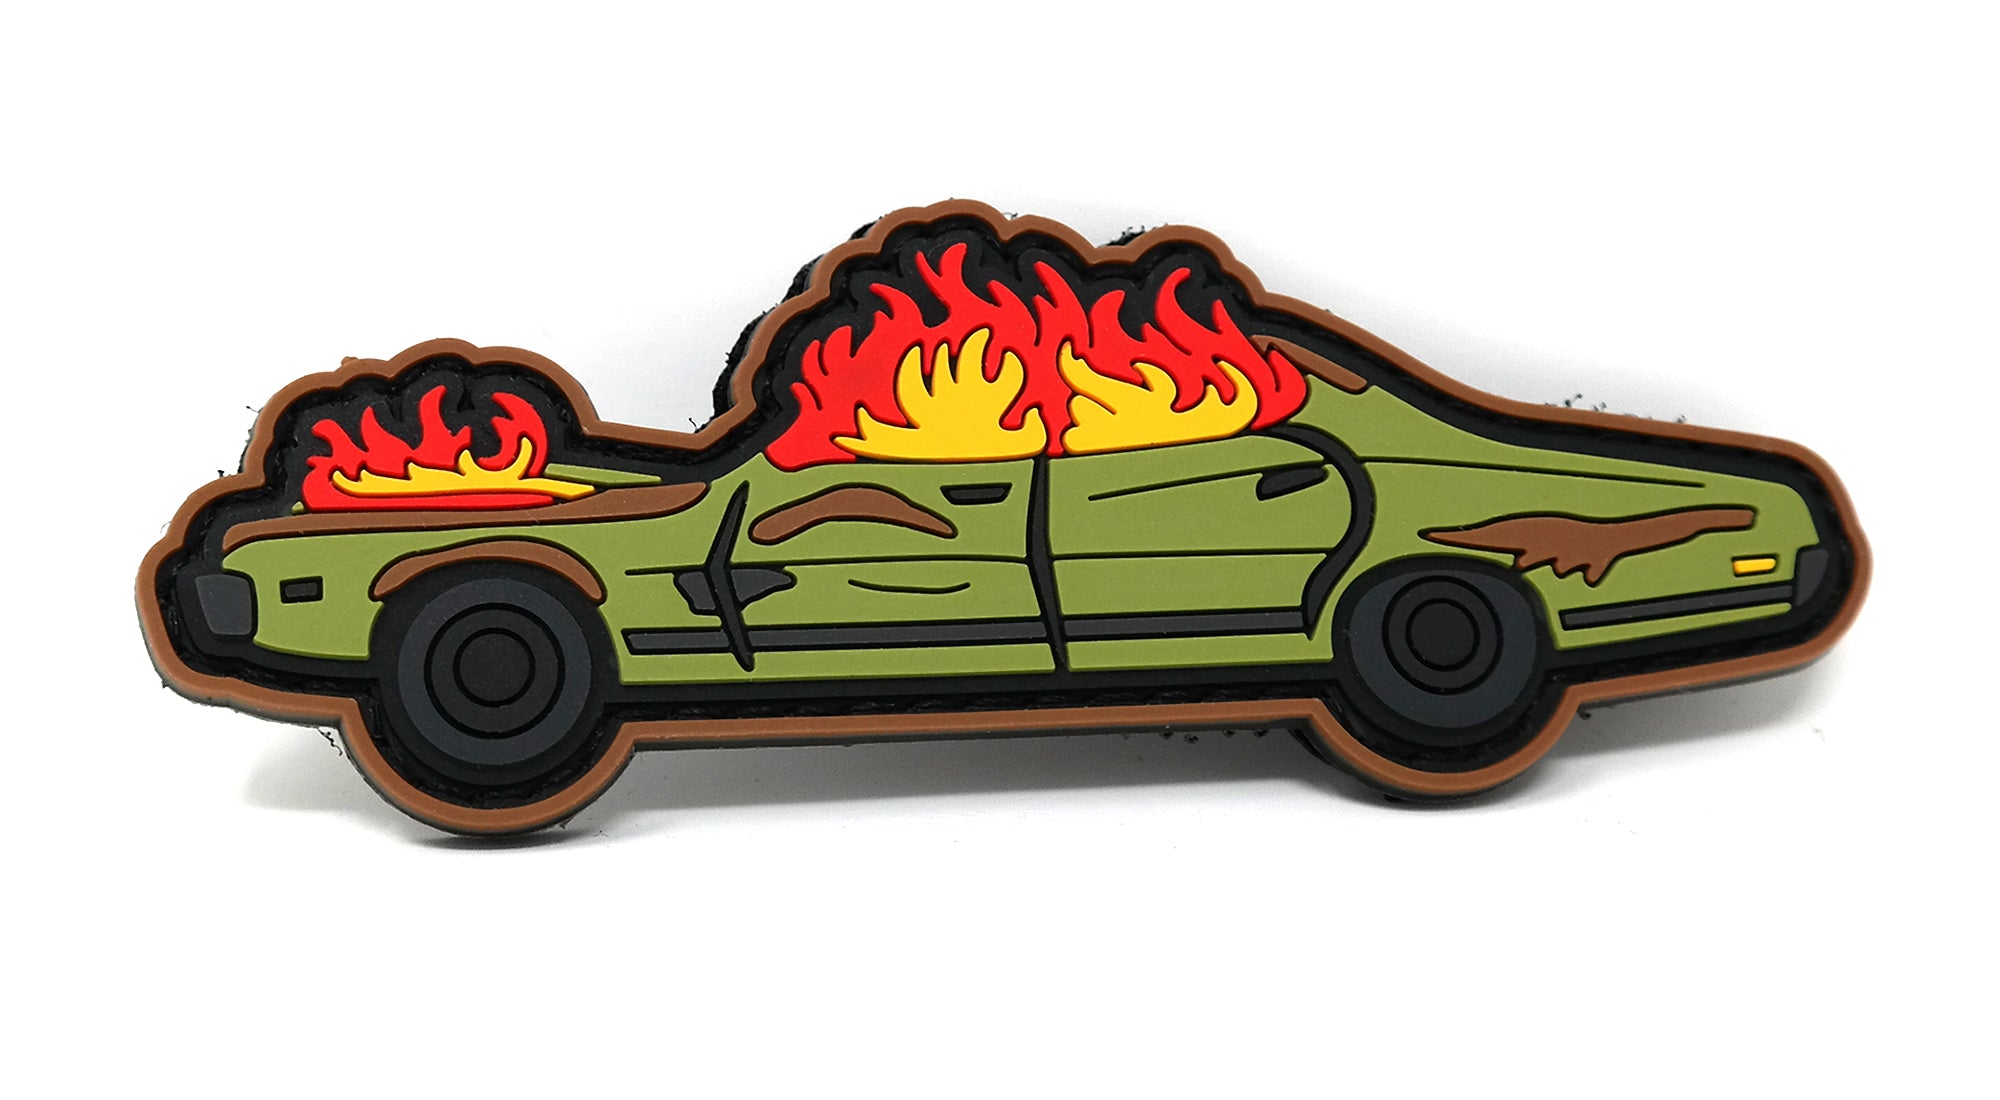 The Dude's Burning Car PVC Rubber Funny Tactical Hook and Loop Patch